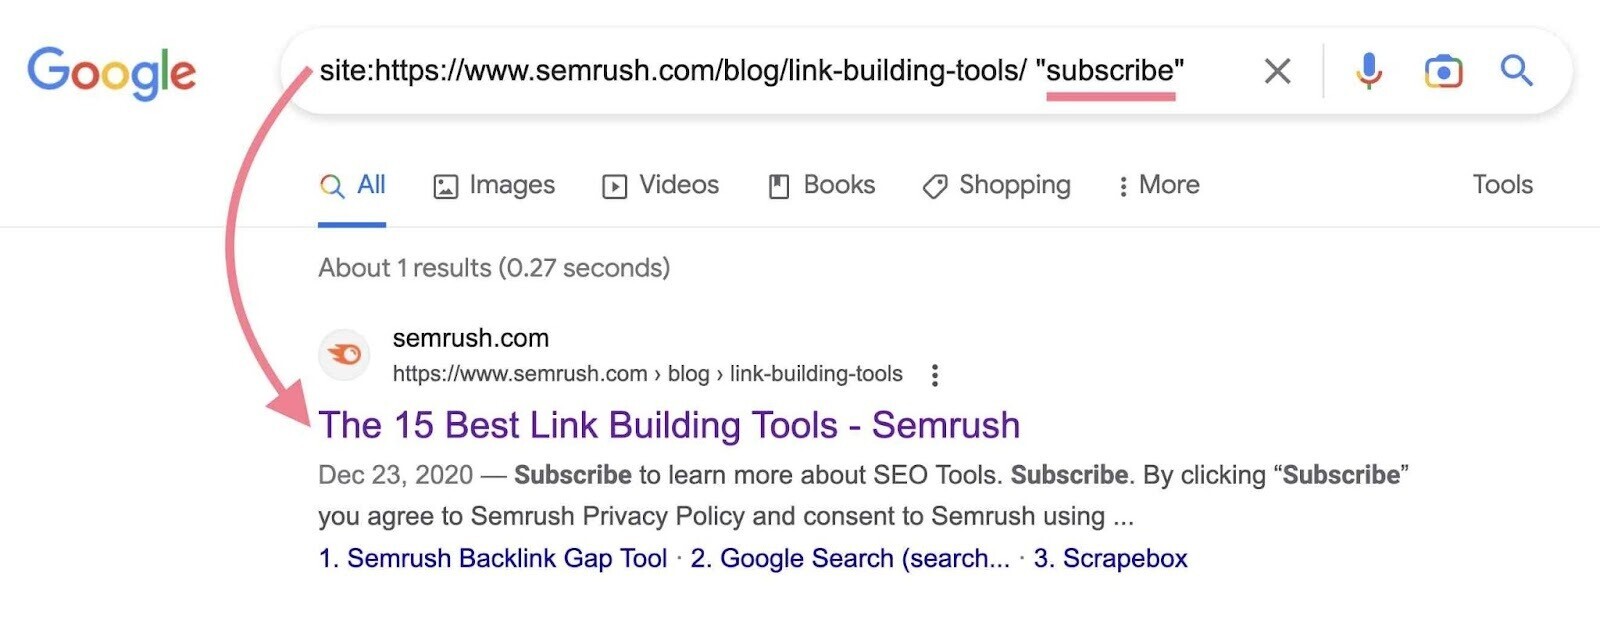 indexed JS content shown in SERP